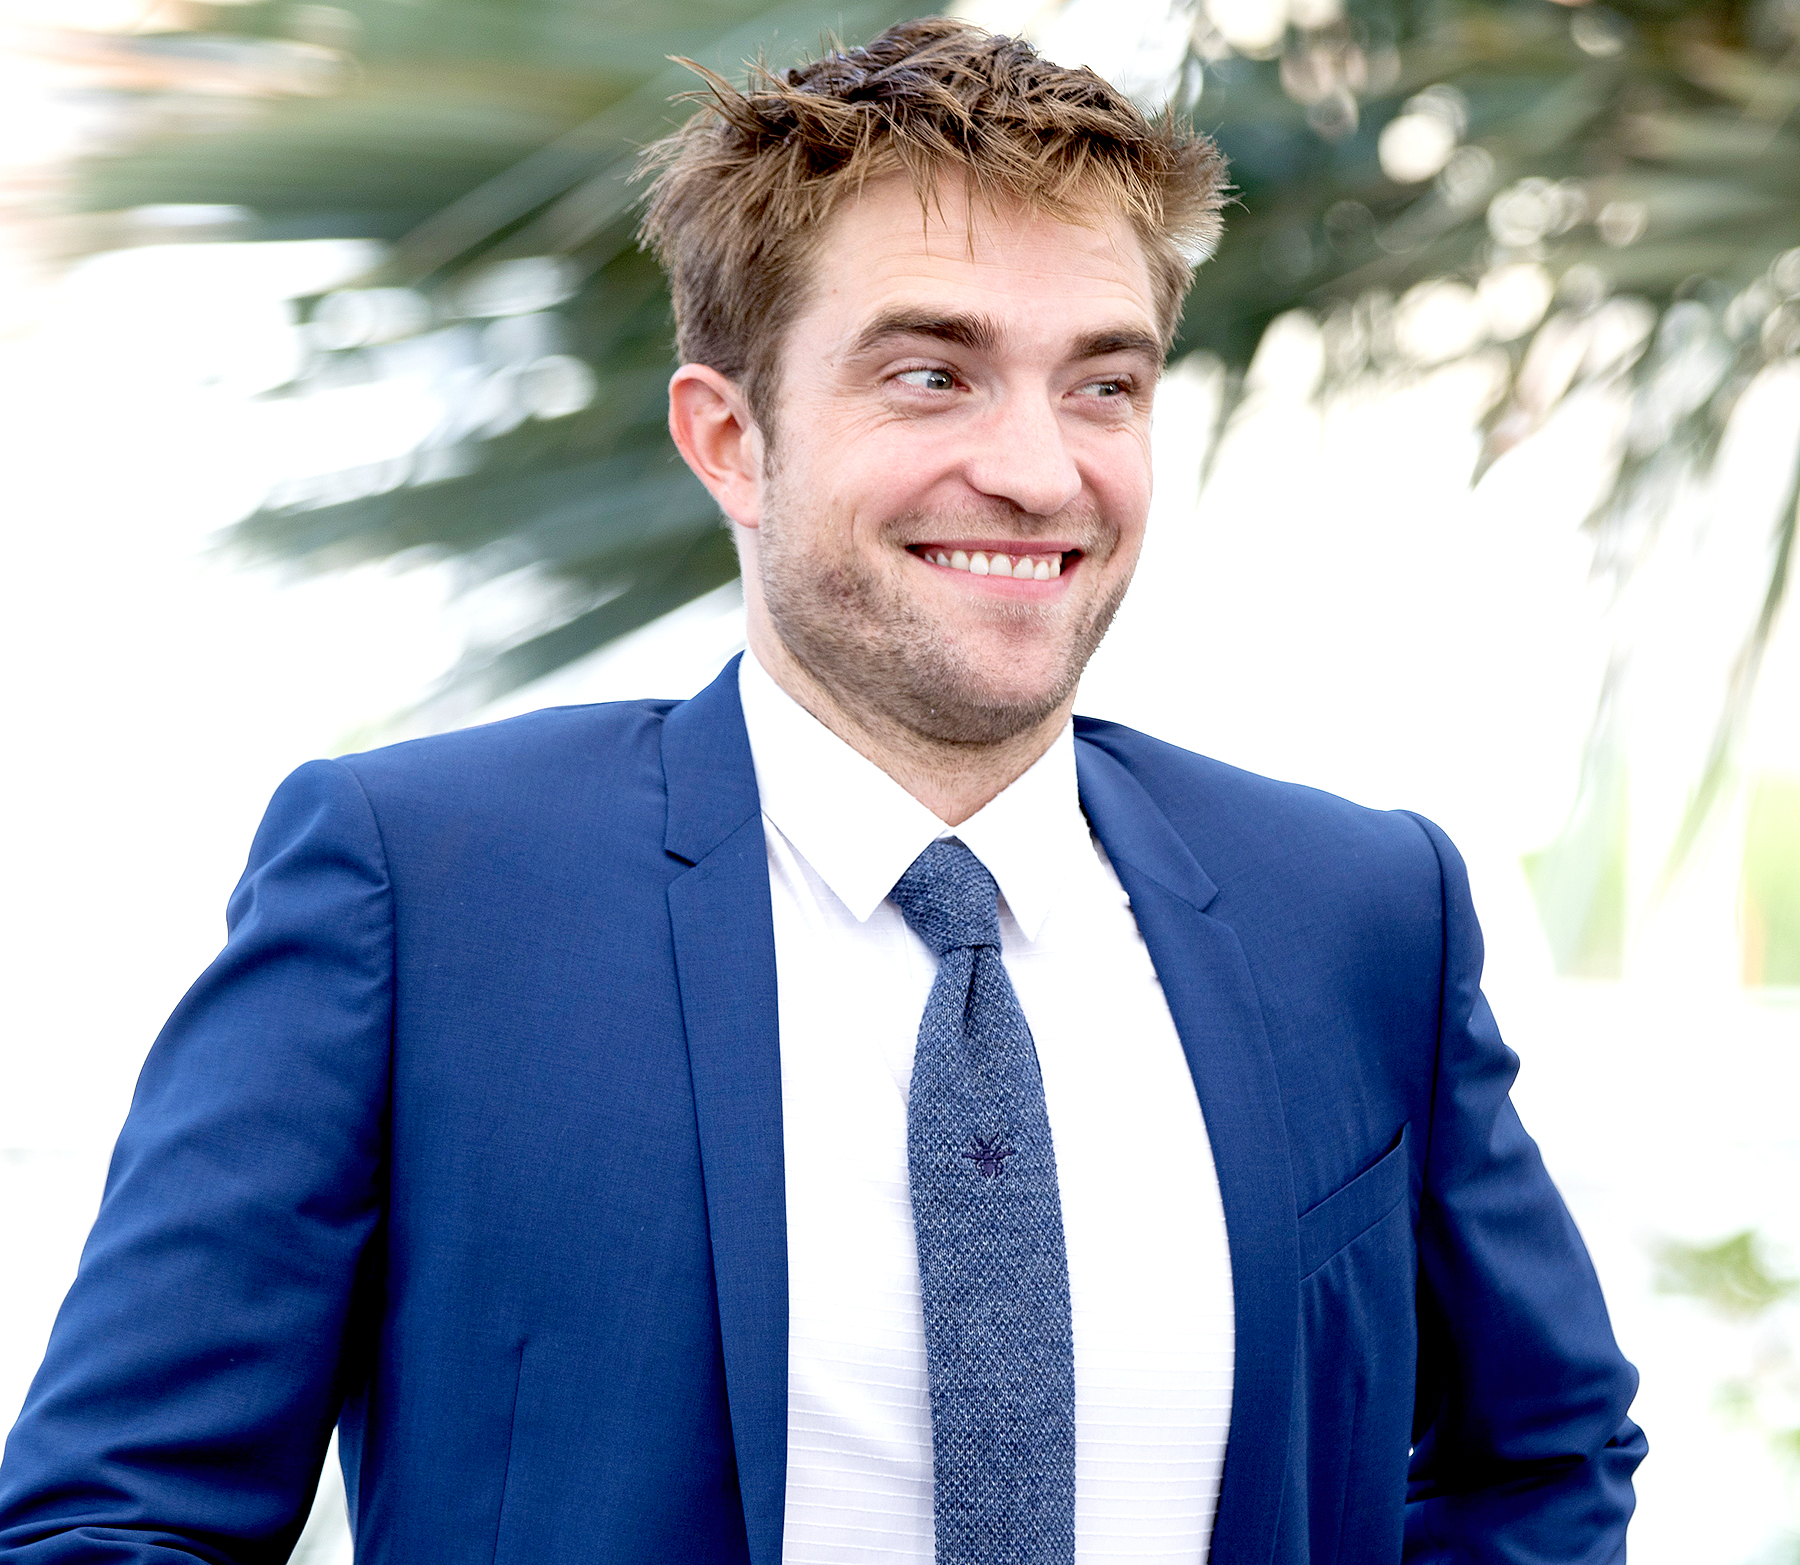 Robert Pattinson Reveals He Was Almost Fired From 'Twilight'1800 x 1565